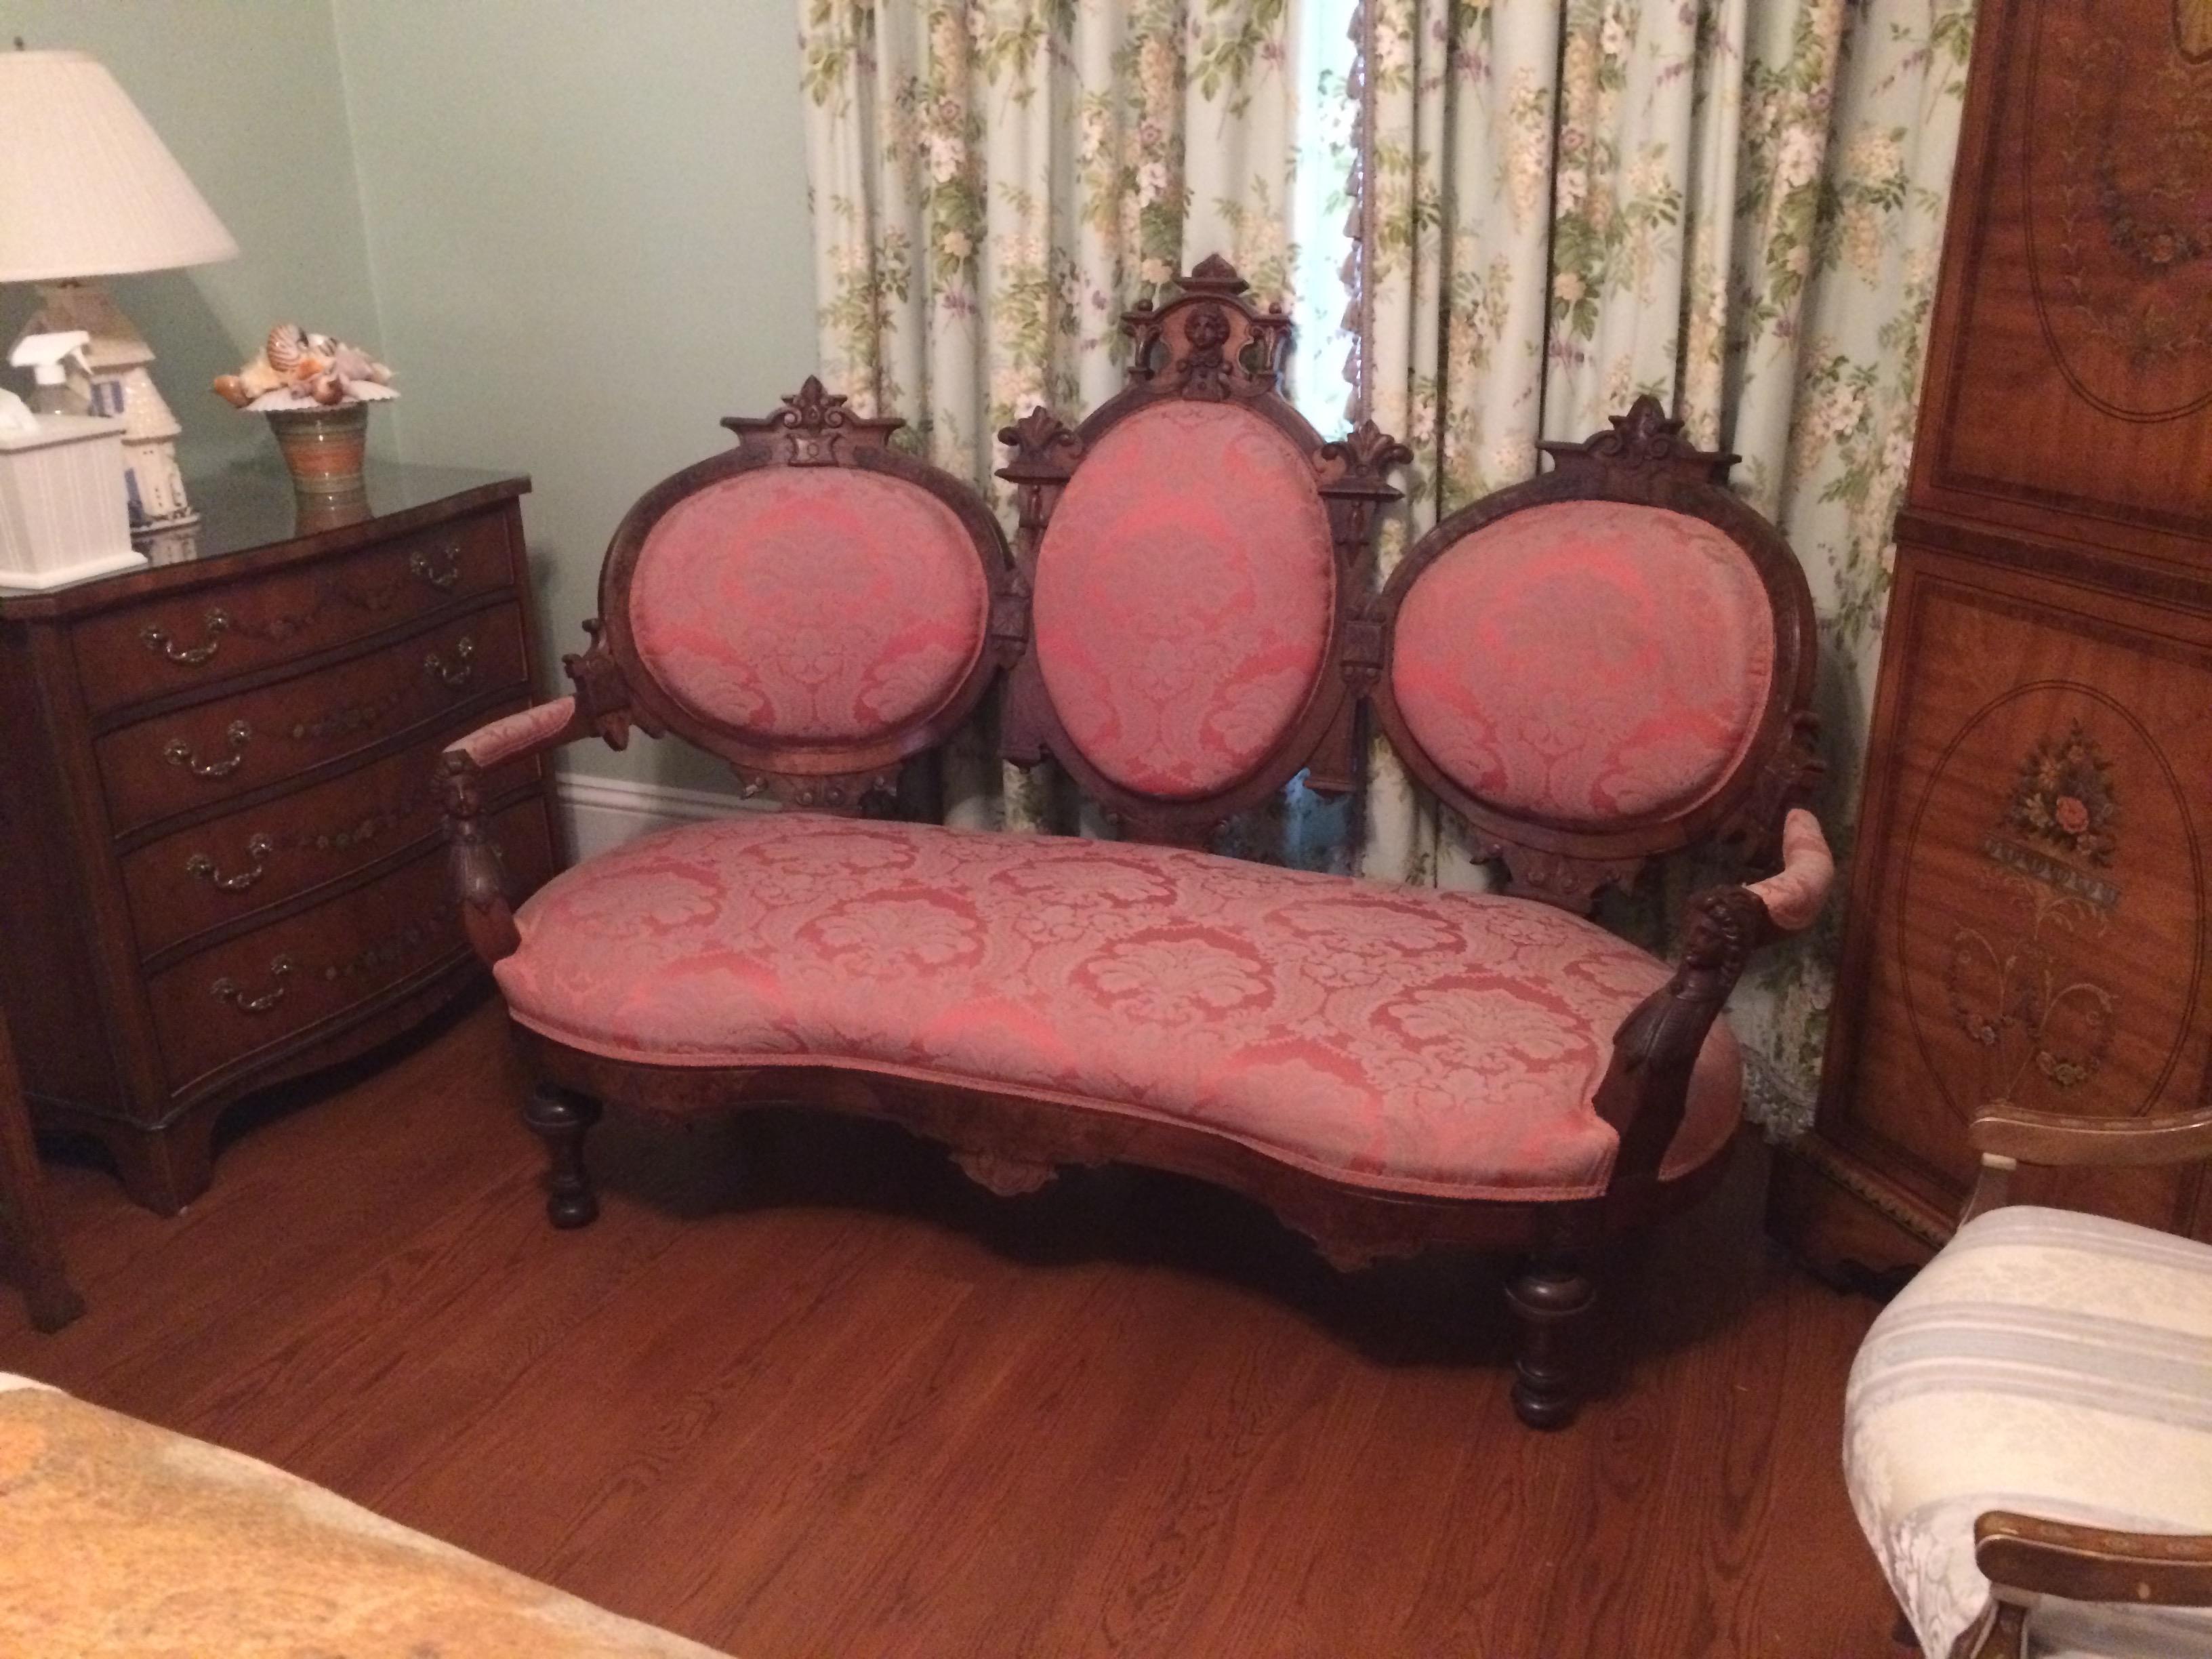 Magnificent Victorian carved walnut loveseat having ornate figural carvings of women on the arms, three oval back rests and a sexy kidney shaped seat. Upholstered in a silk jacard in a pretty shade of rasberry. Belongs in a Victoria's Secret